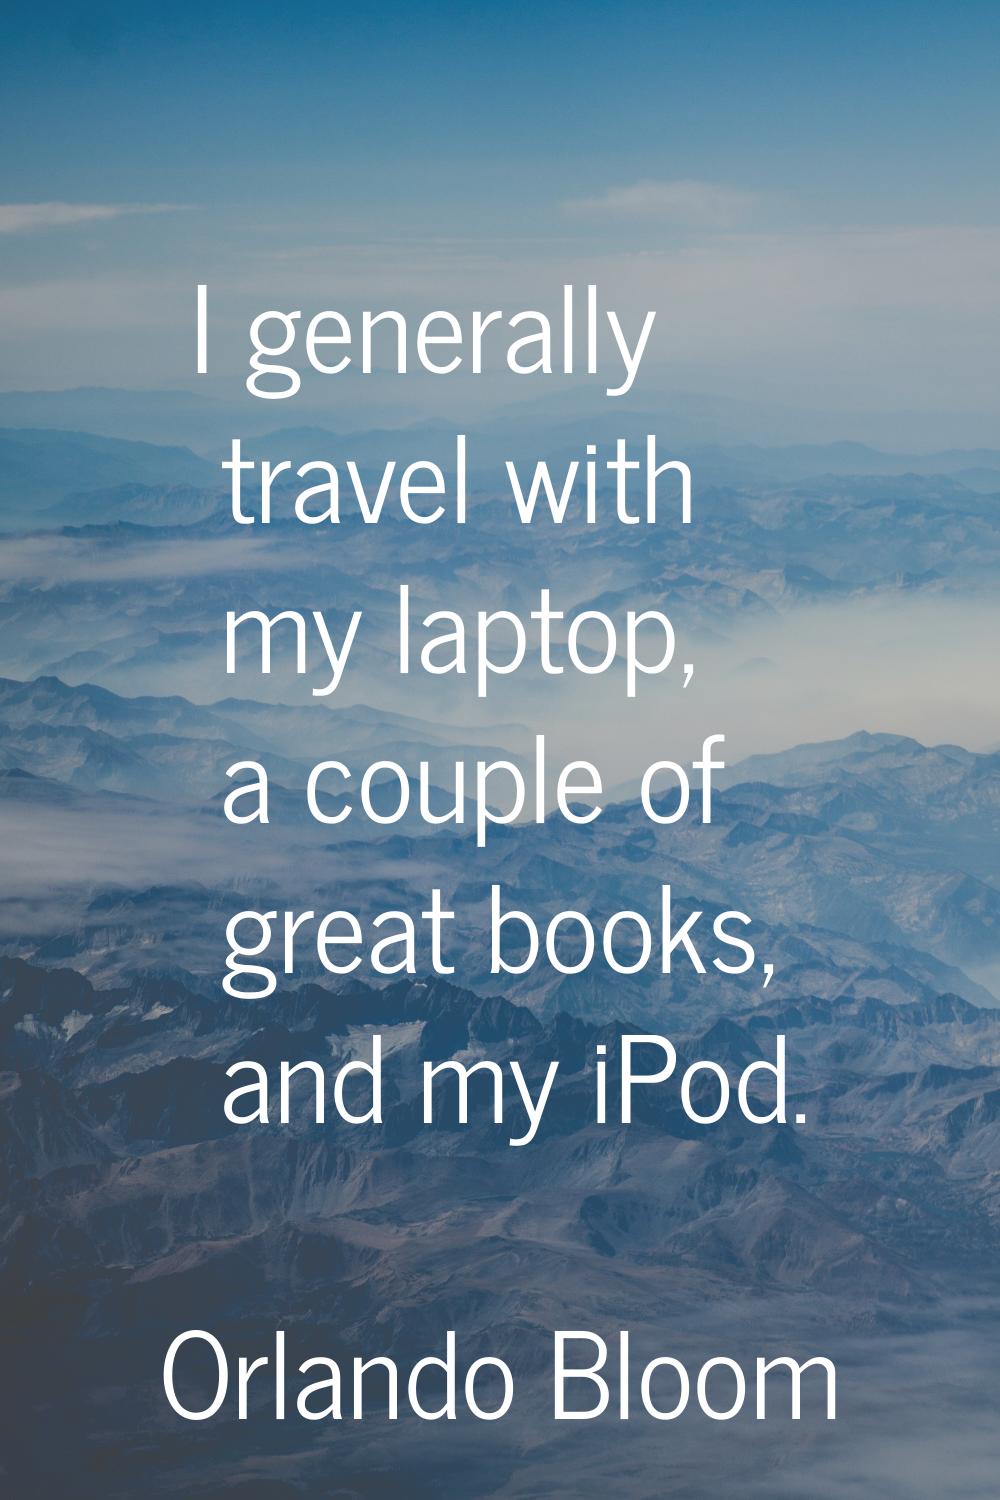 I generally travel with my laptop, a couple of great books, and my iPod.